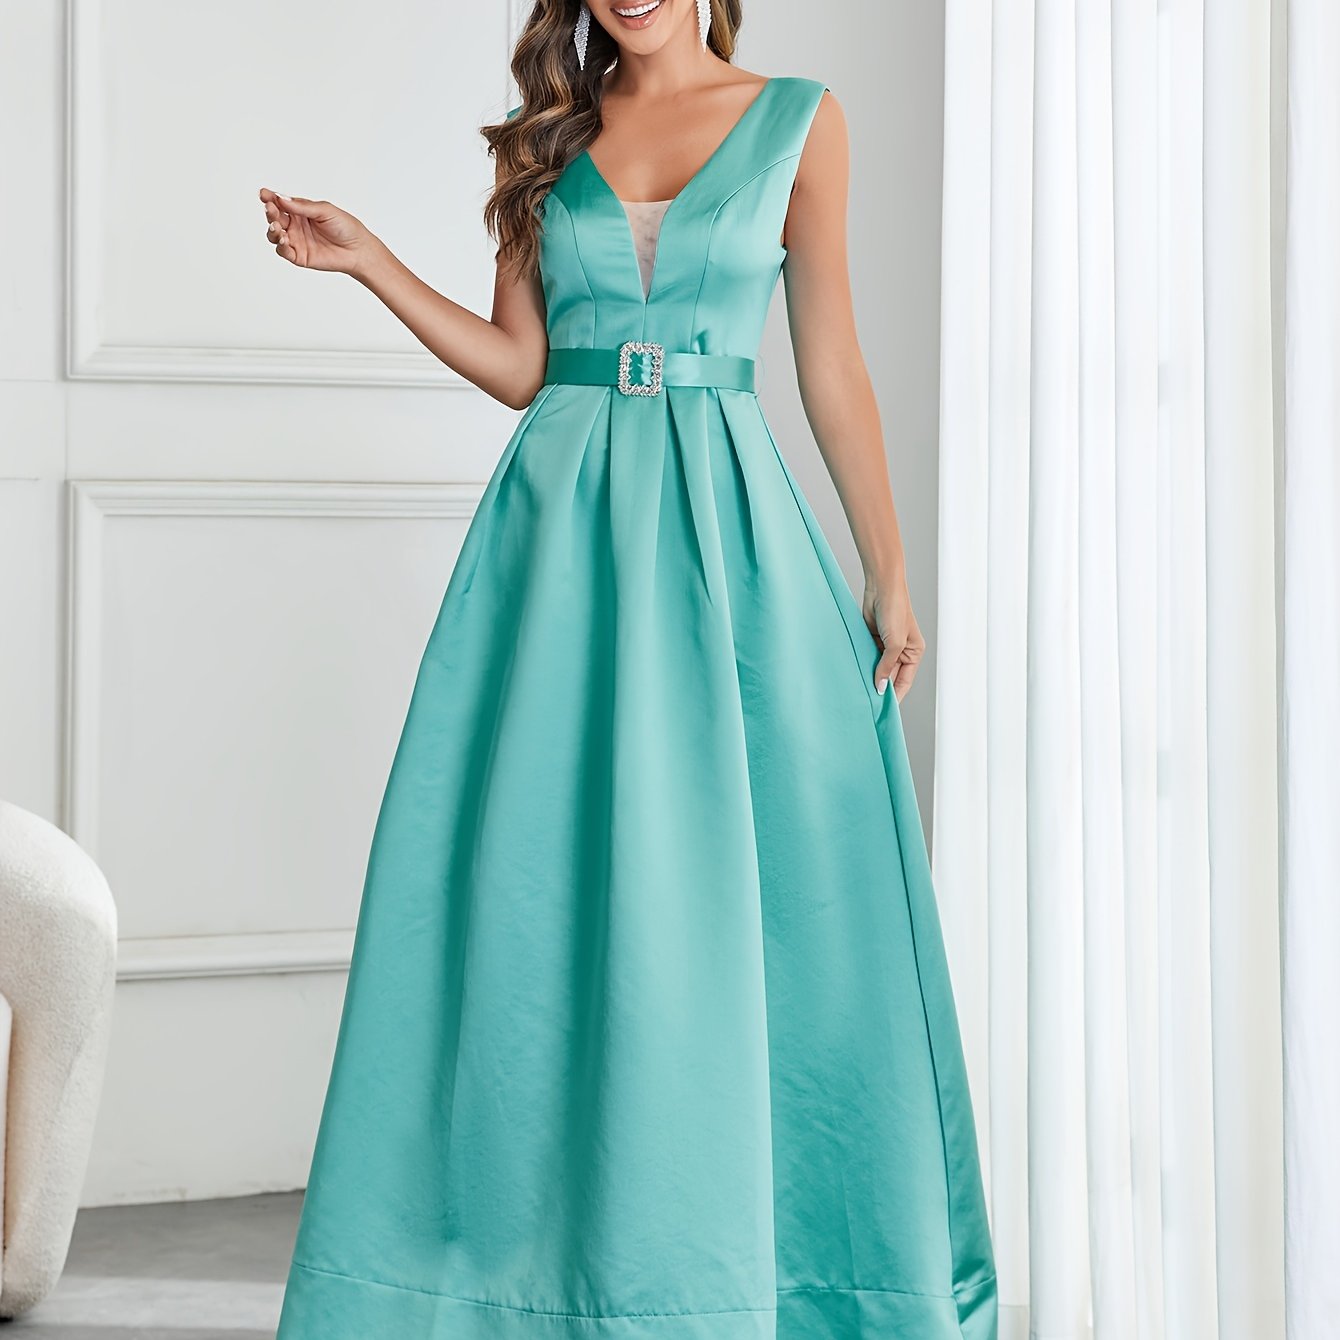 satin v neck cocktail dress elegant sleeveless belted a line evening dress for party banquet womens clothing